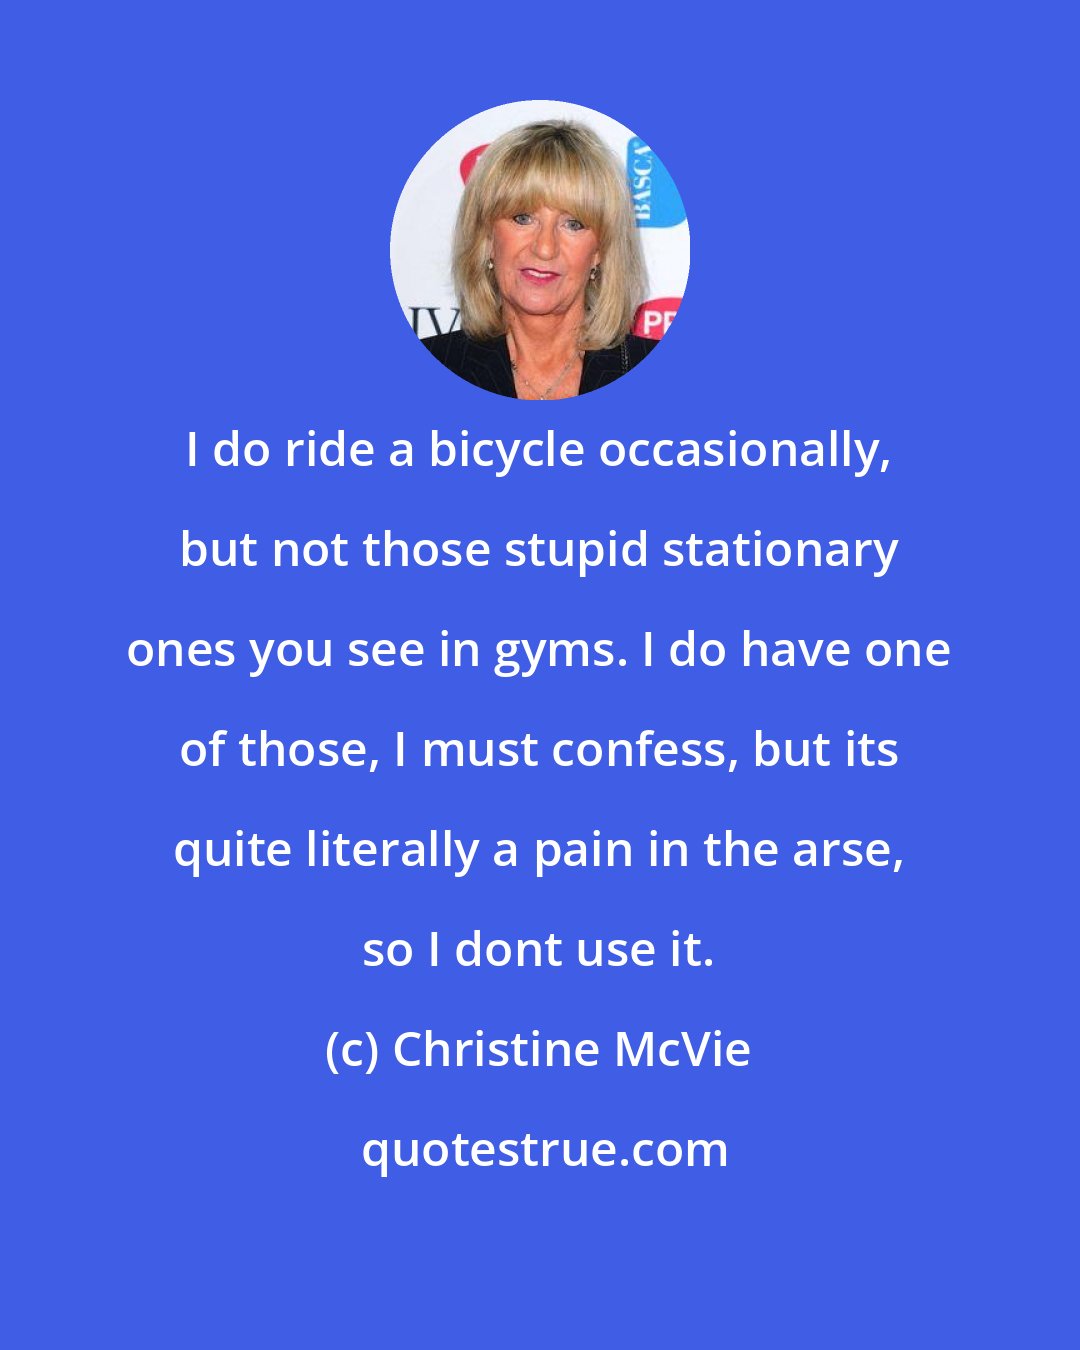 Christine McVie: I do ride a bicycle occasionally, but not those stupid stationary ones you see in gyms. I do have one of those, I must confess, but its quite literally a pain in the arse, so I dont use it.